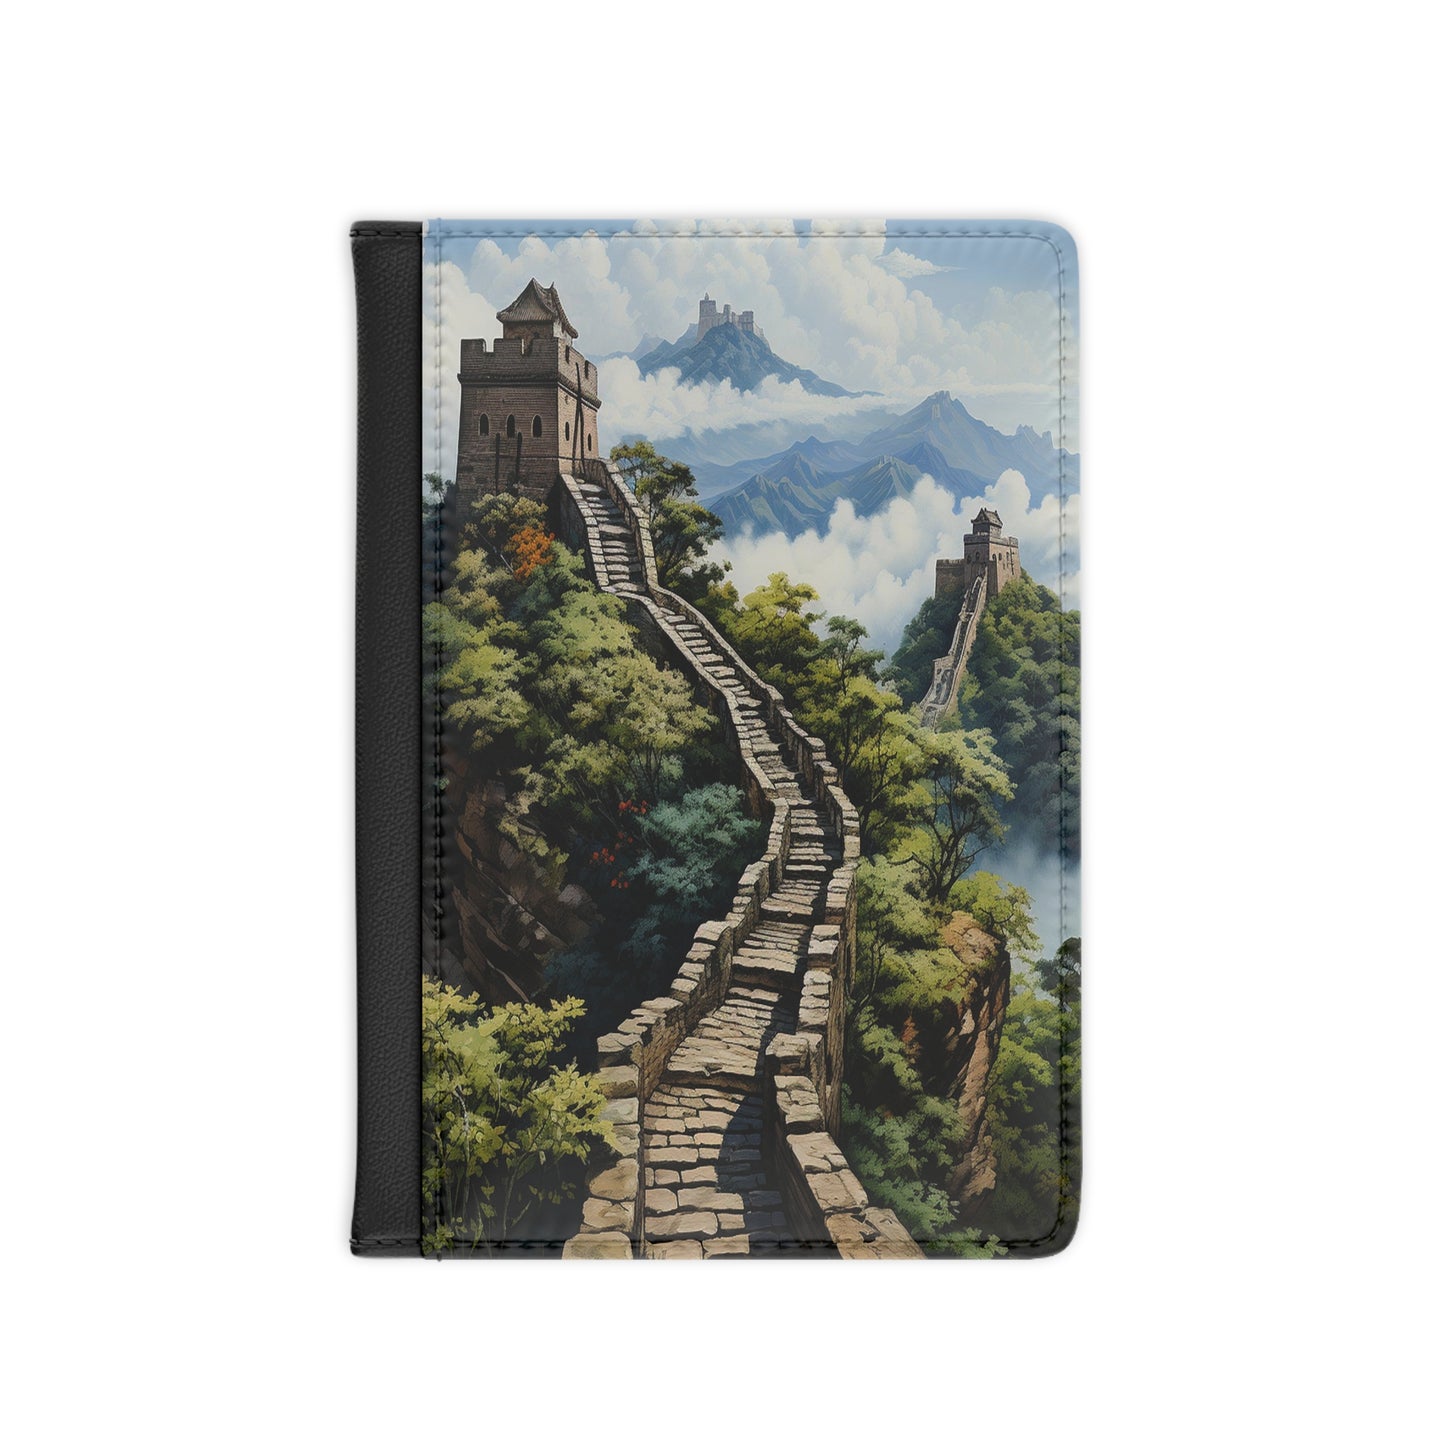 Wall of Wonders Passport Cover | Voyage of Colors Collection | Passport Covers | Travel accessories | Travel accessories for women